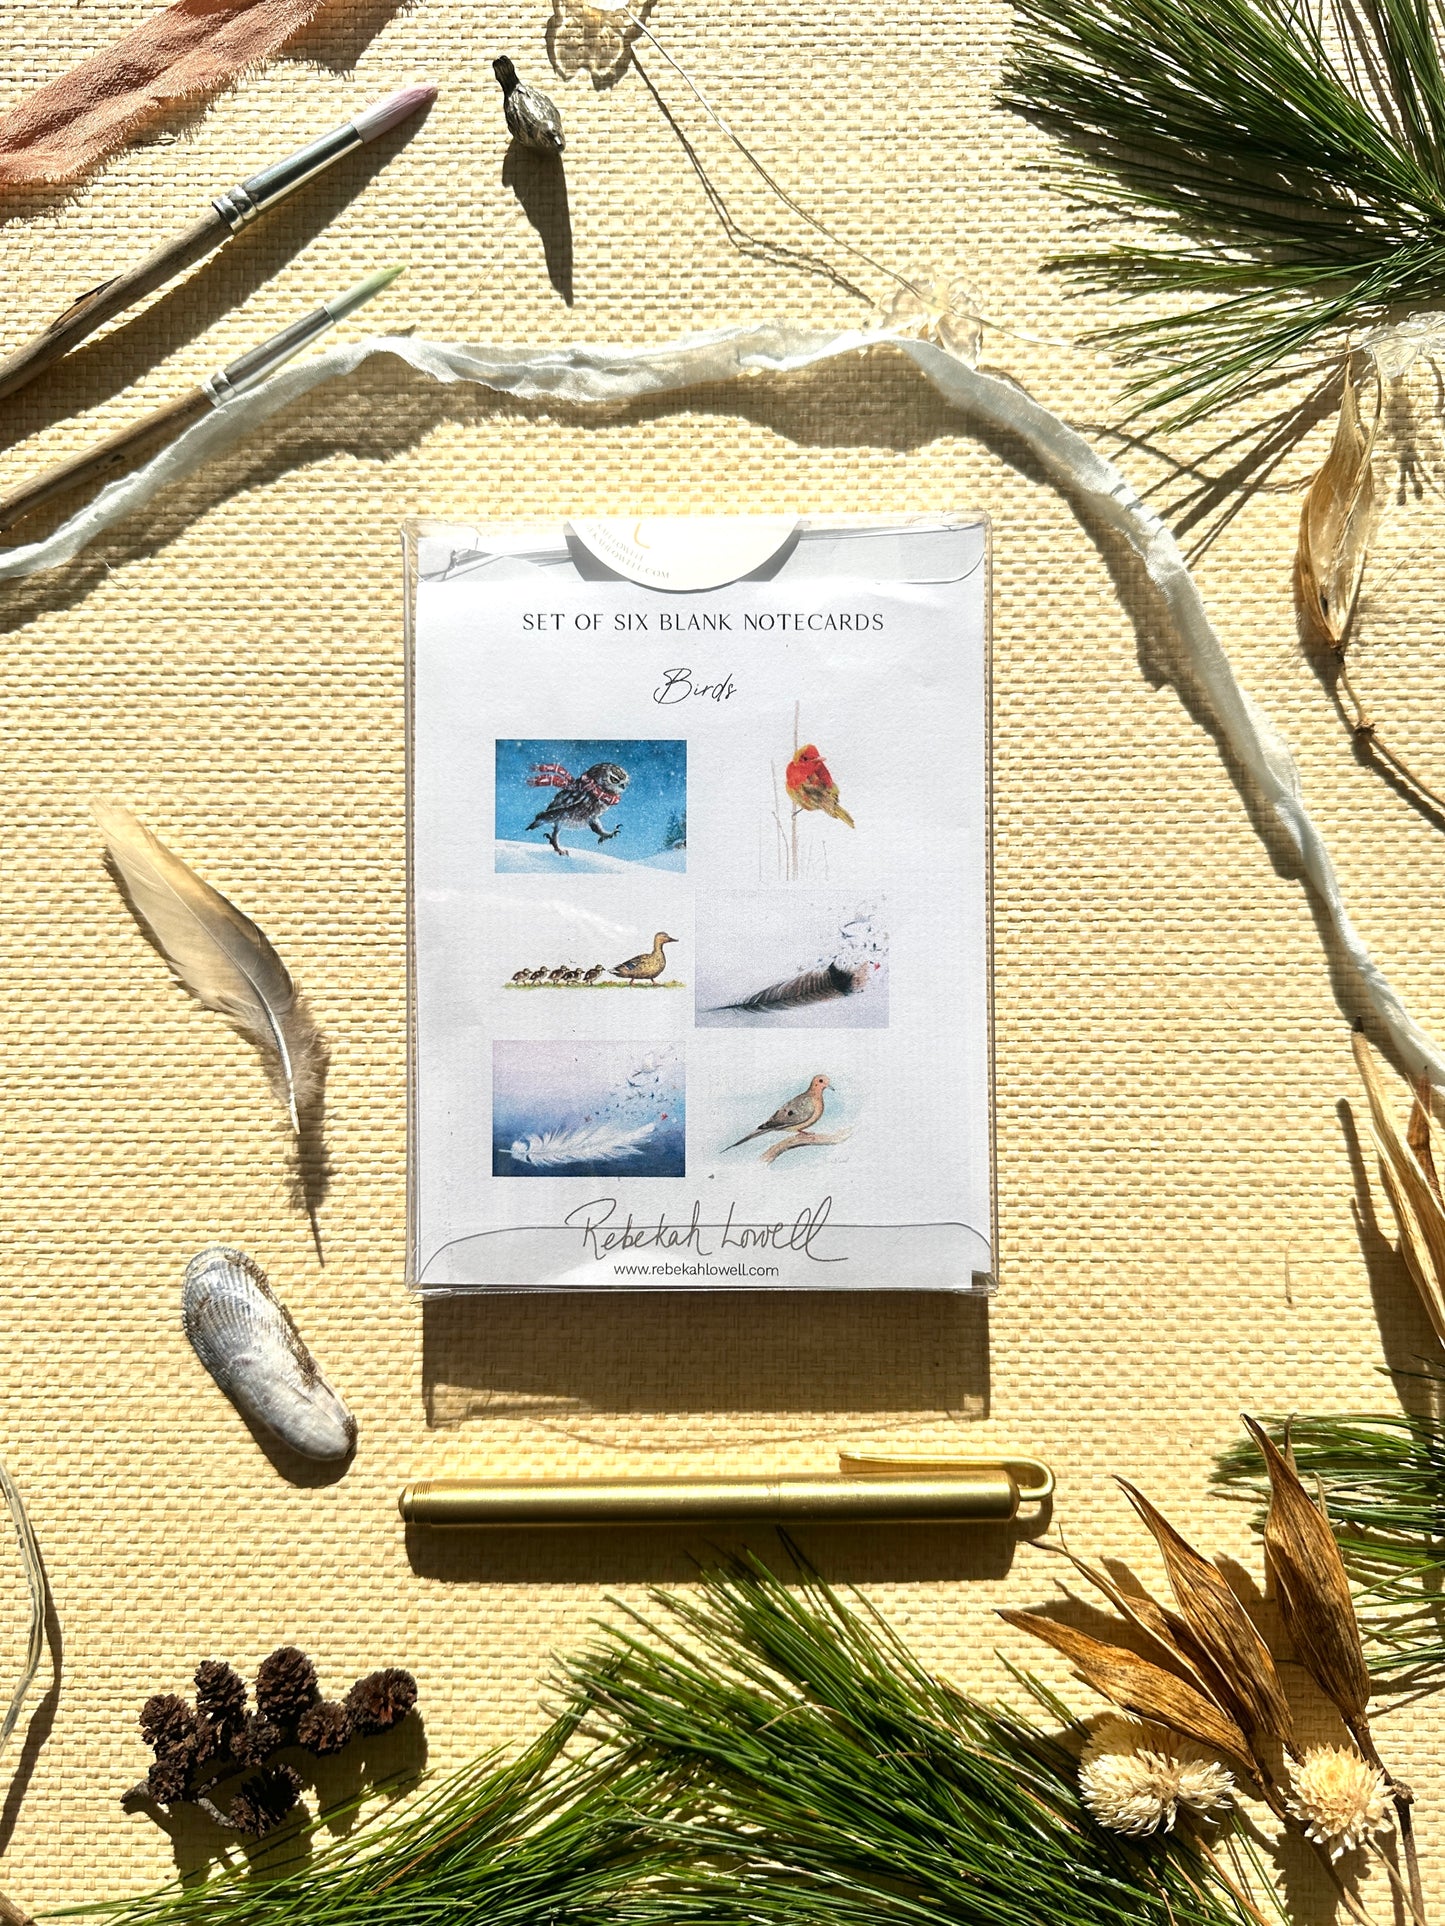 Boxed Set of Six Blank Notecards, Birds Collection